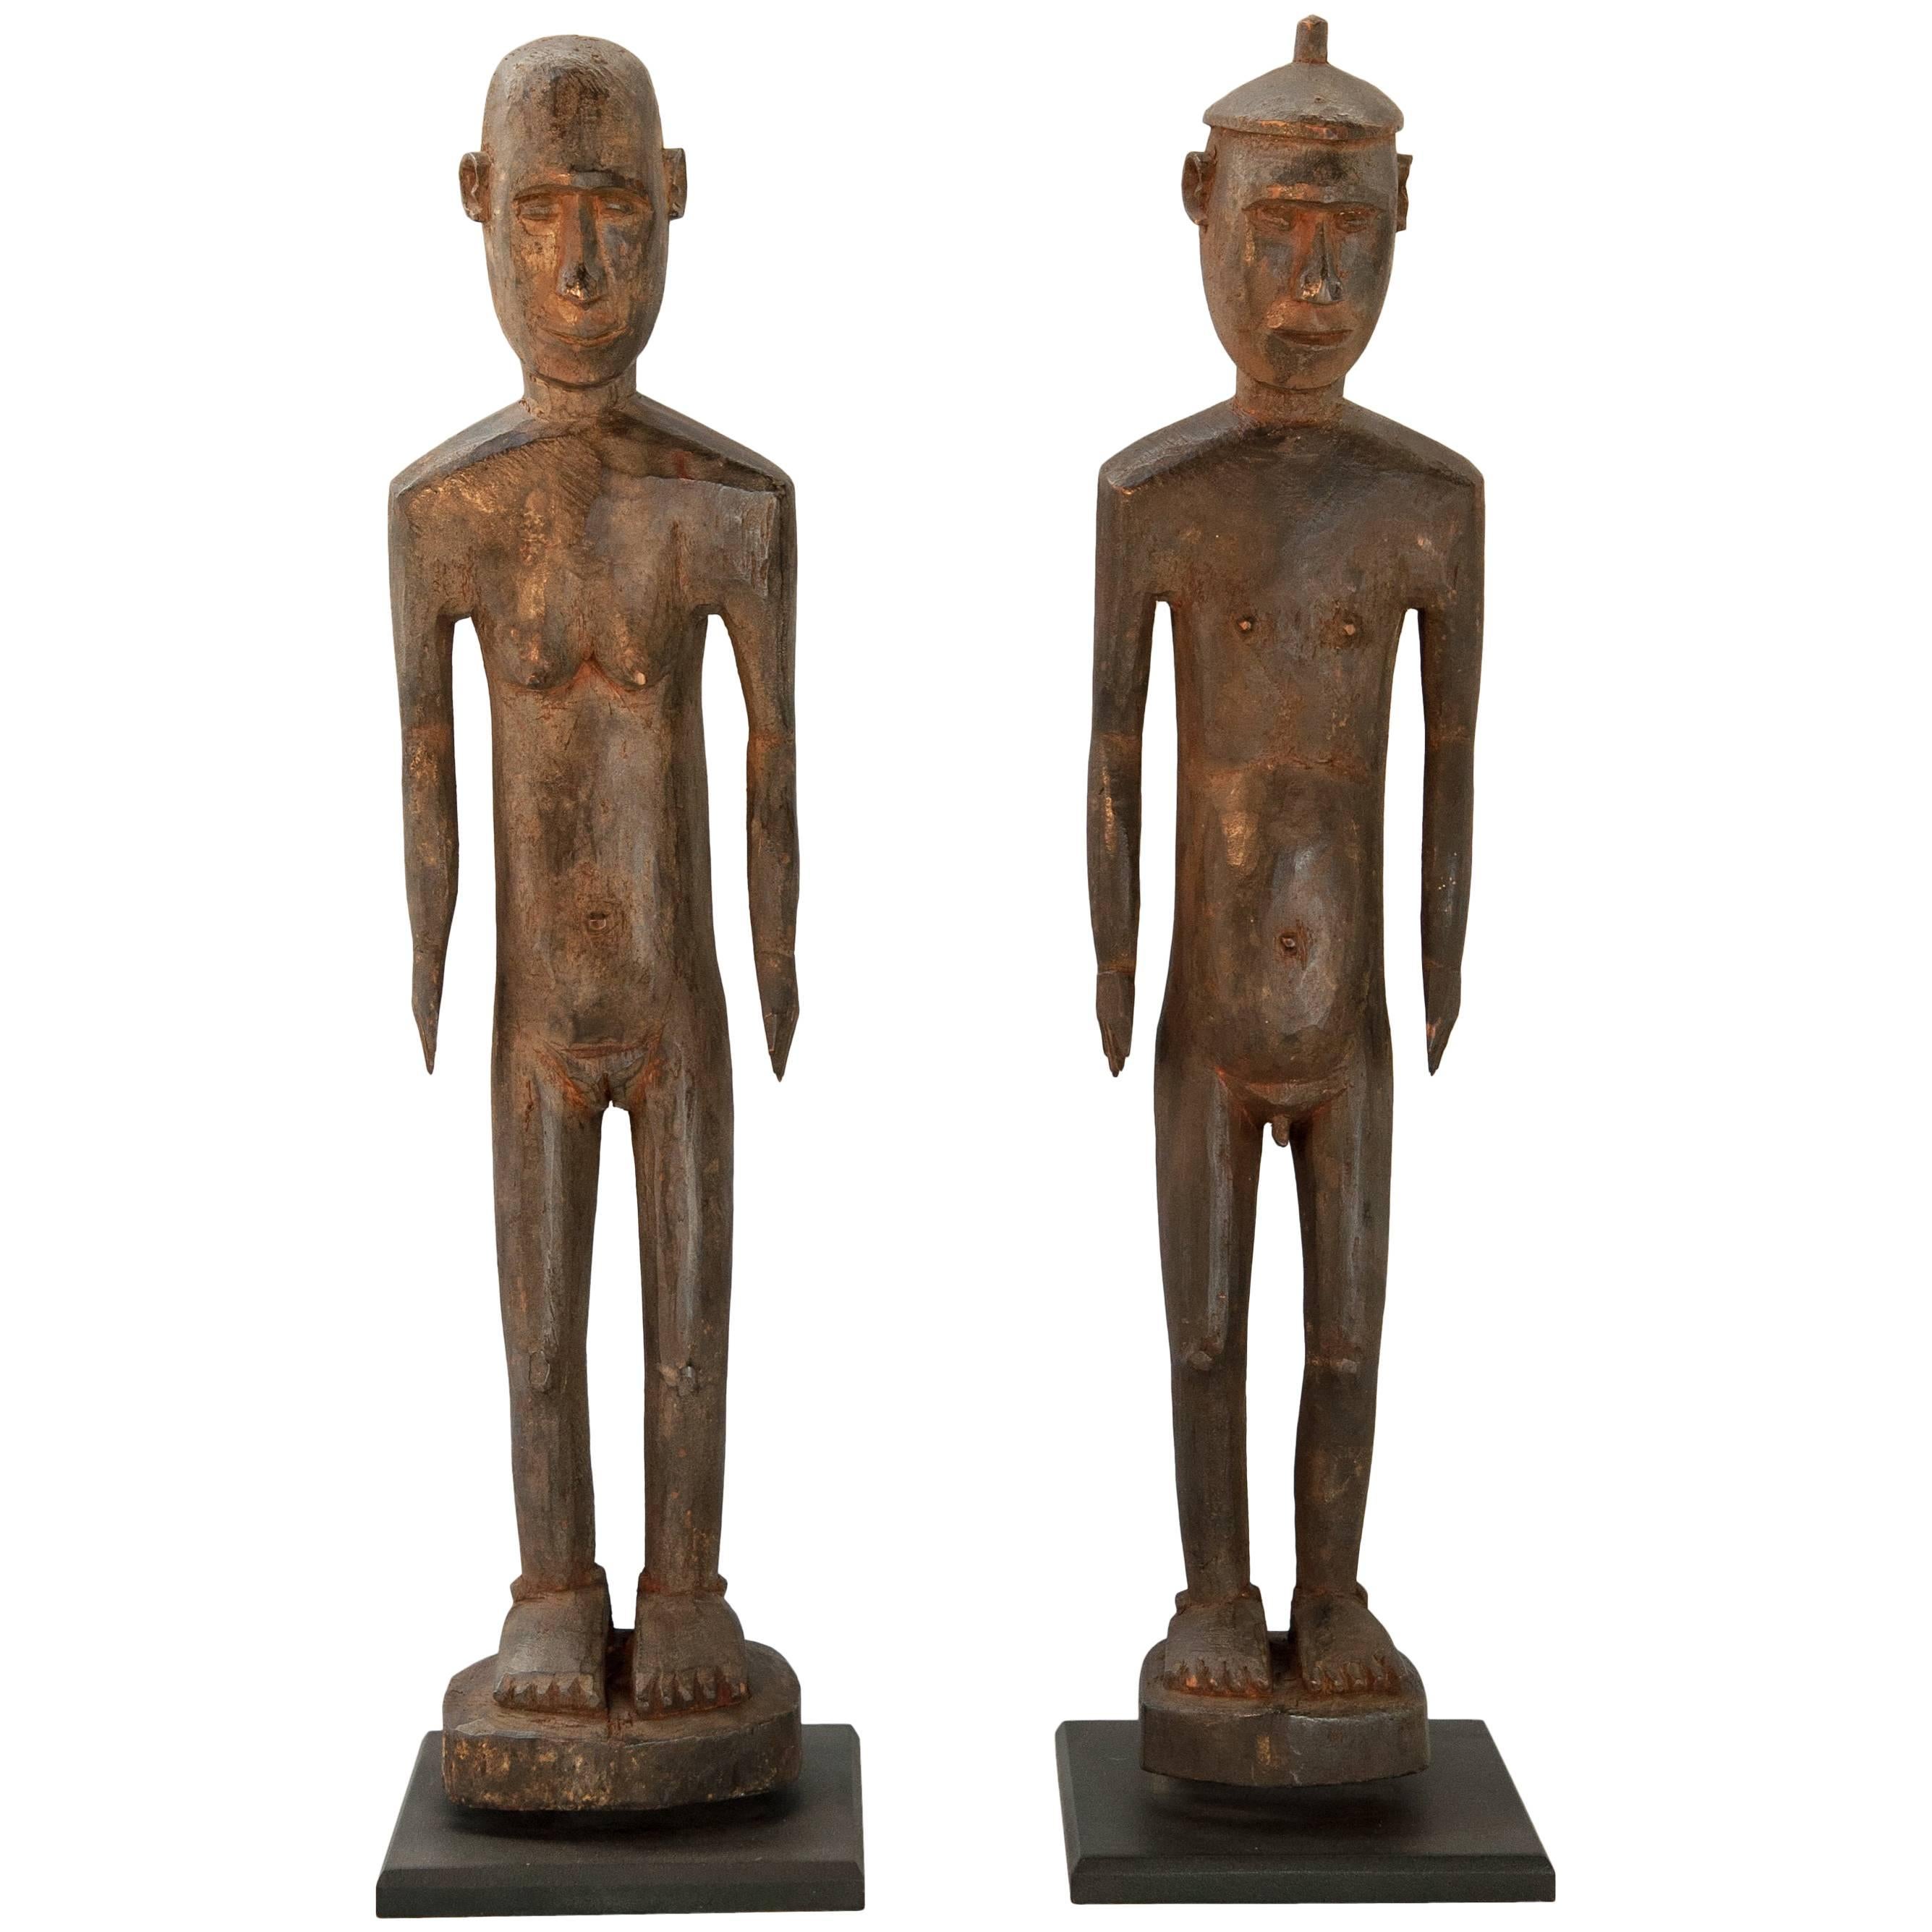 Tribal Ancestor Ana Deo Statues Lio-Ende, Central Flores. Mid-Late 20th Century